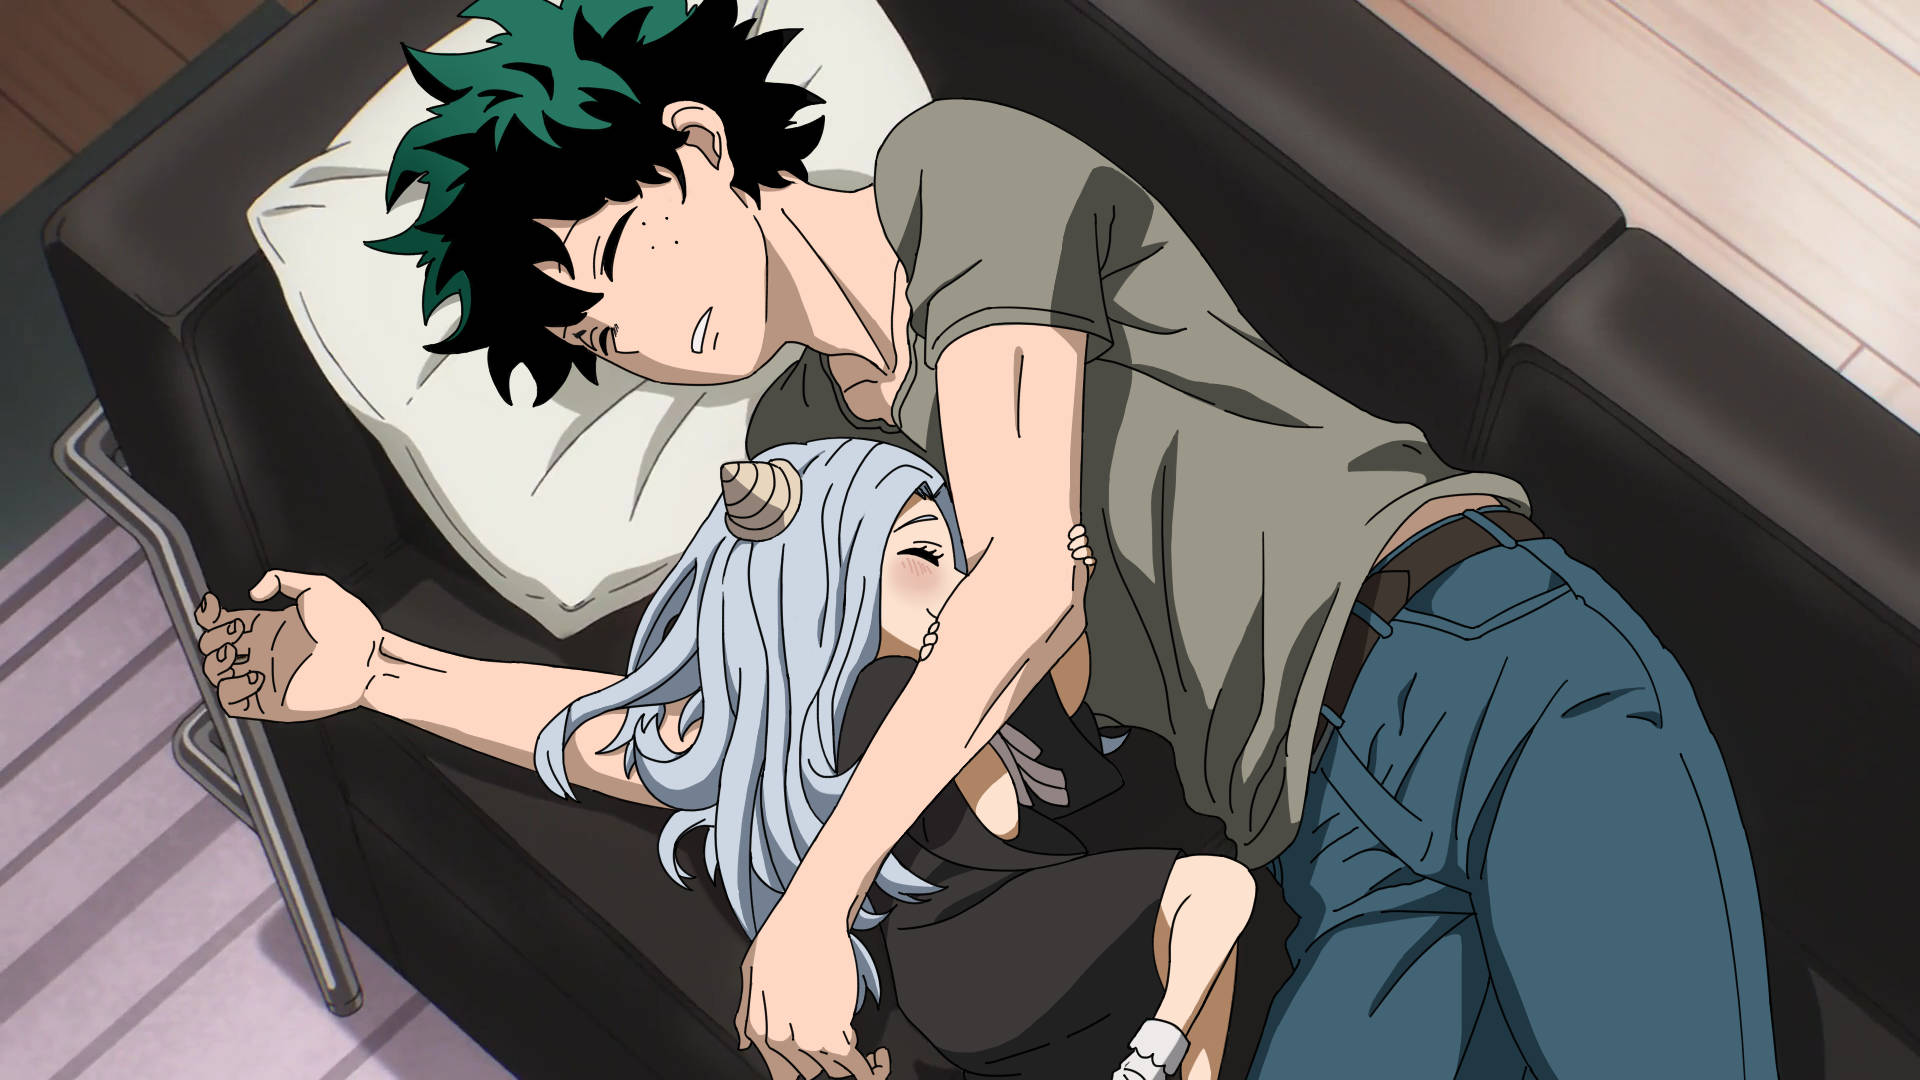 Eri And Midoriya Napping Together On A Couch